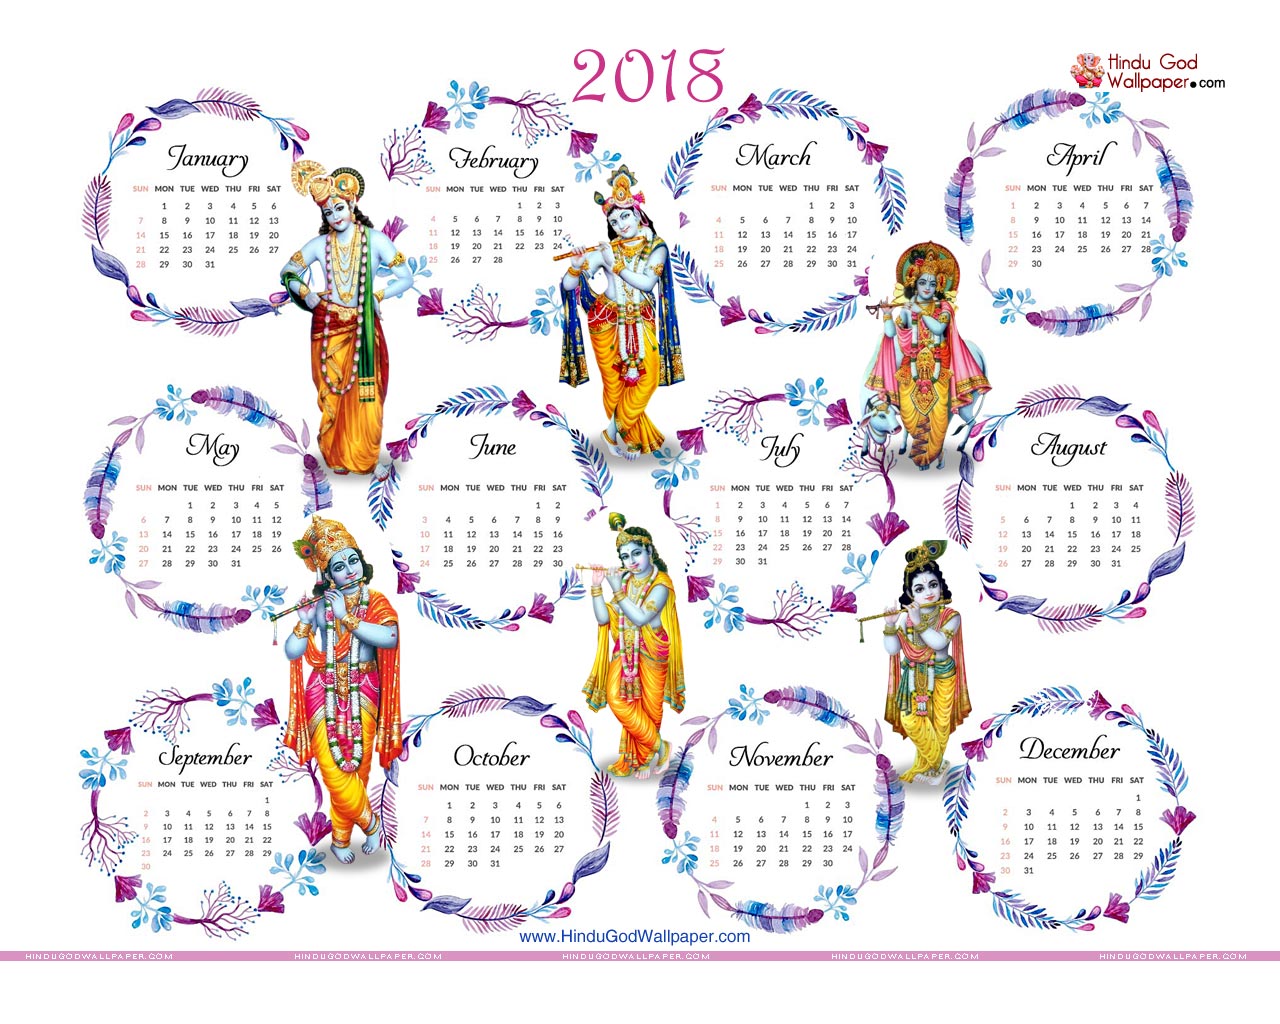 Free Desktop Calendar 2018 with Holidays Click and Download 1280x1024